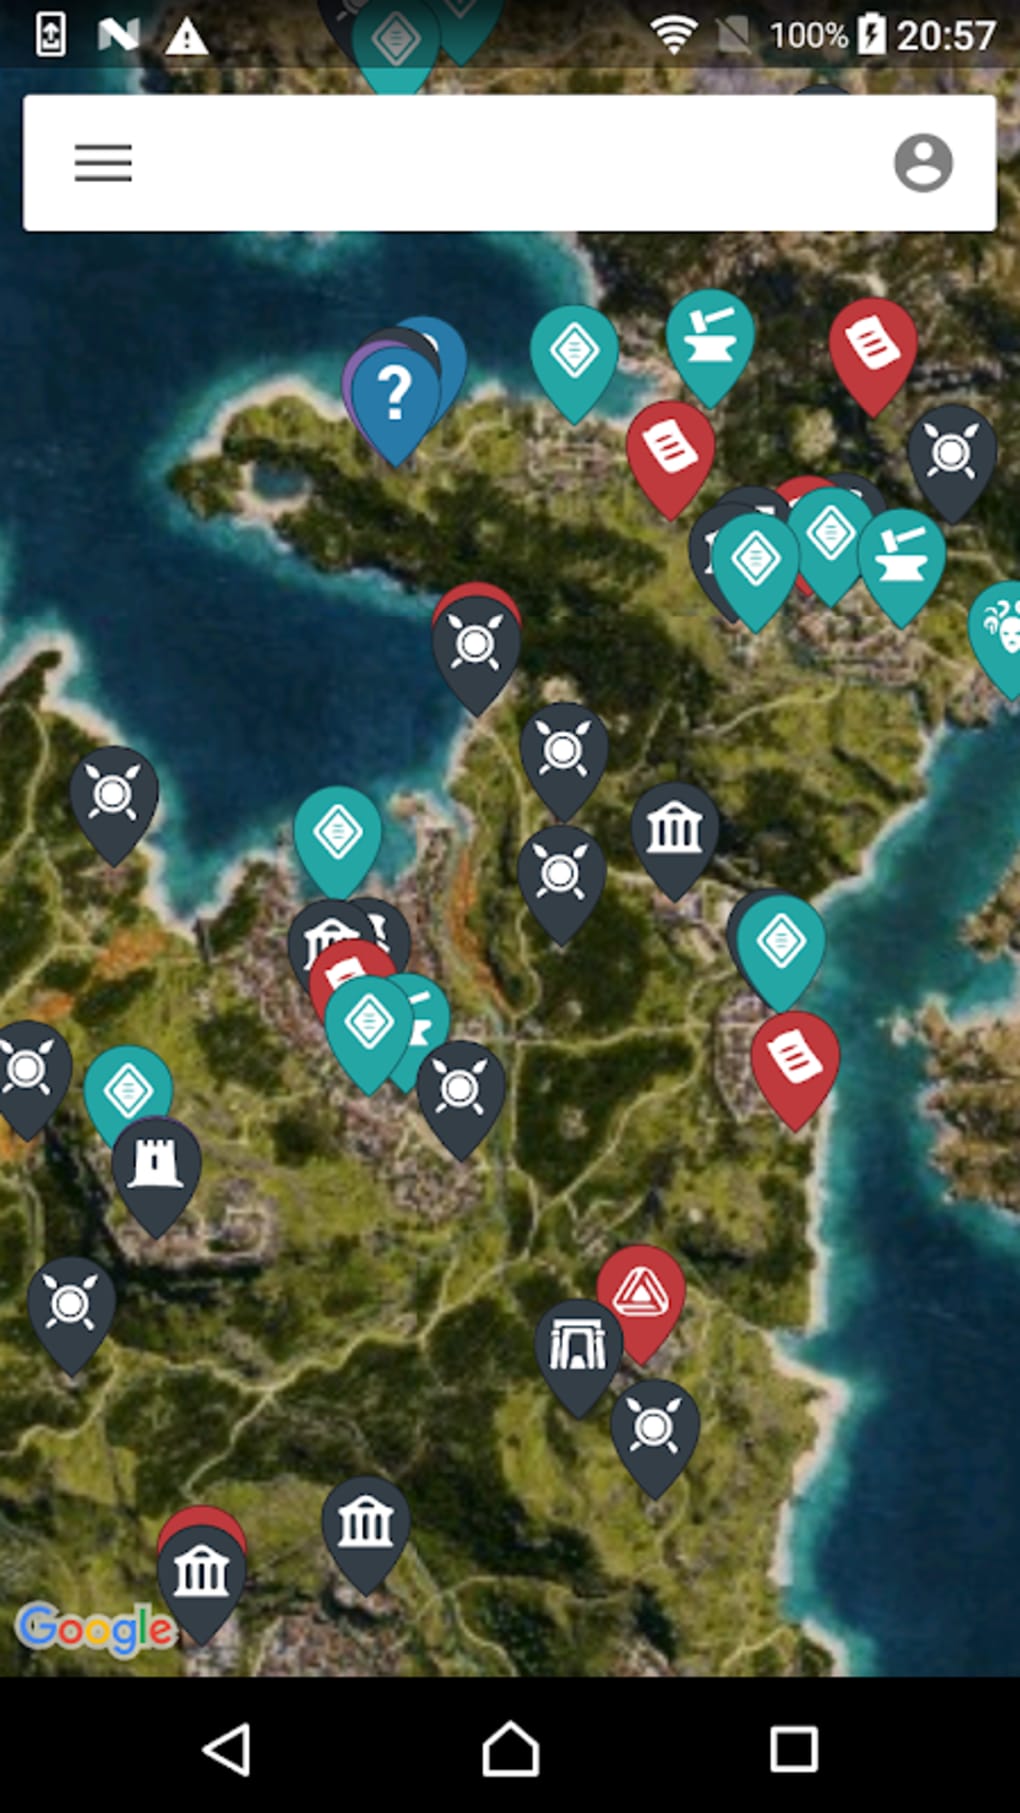 Assassin's Creed Odyssey Orichalcum locations and sources